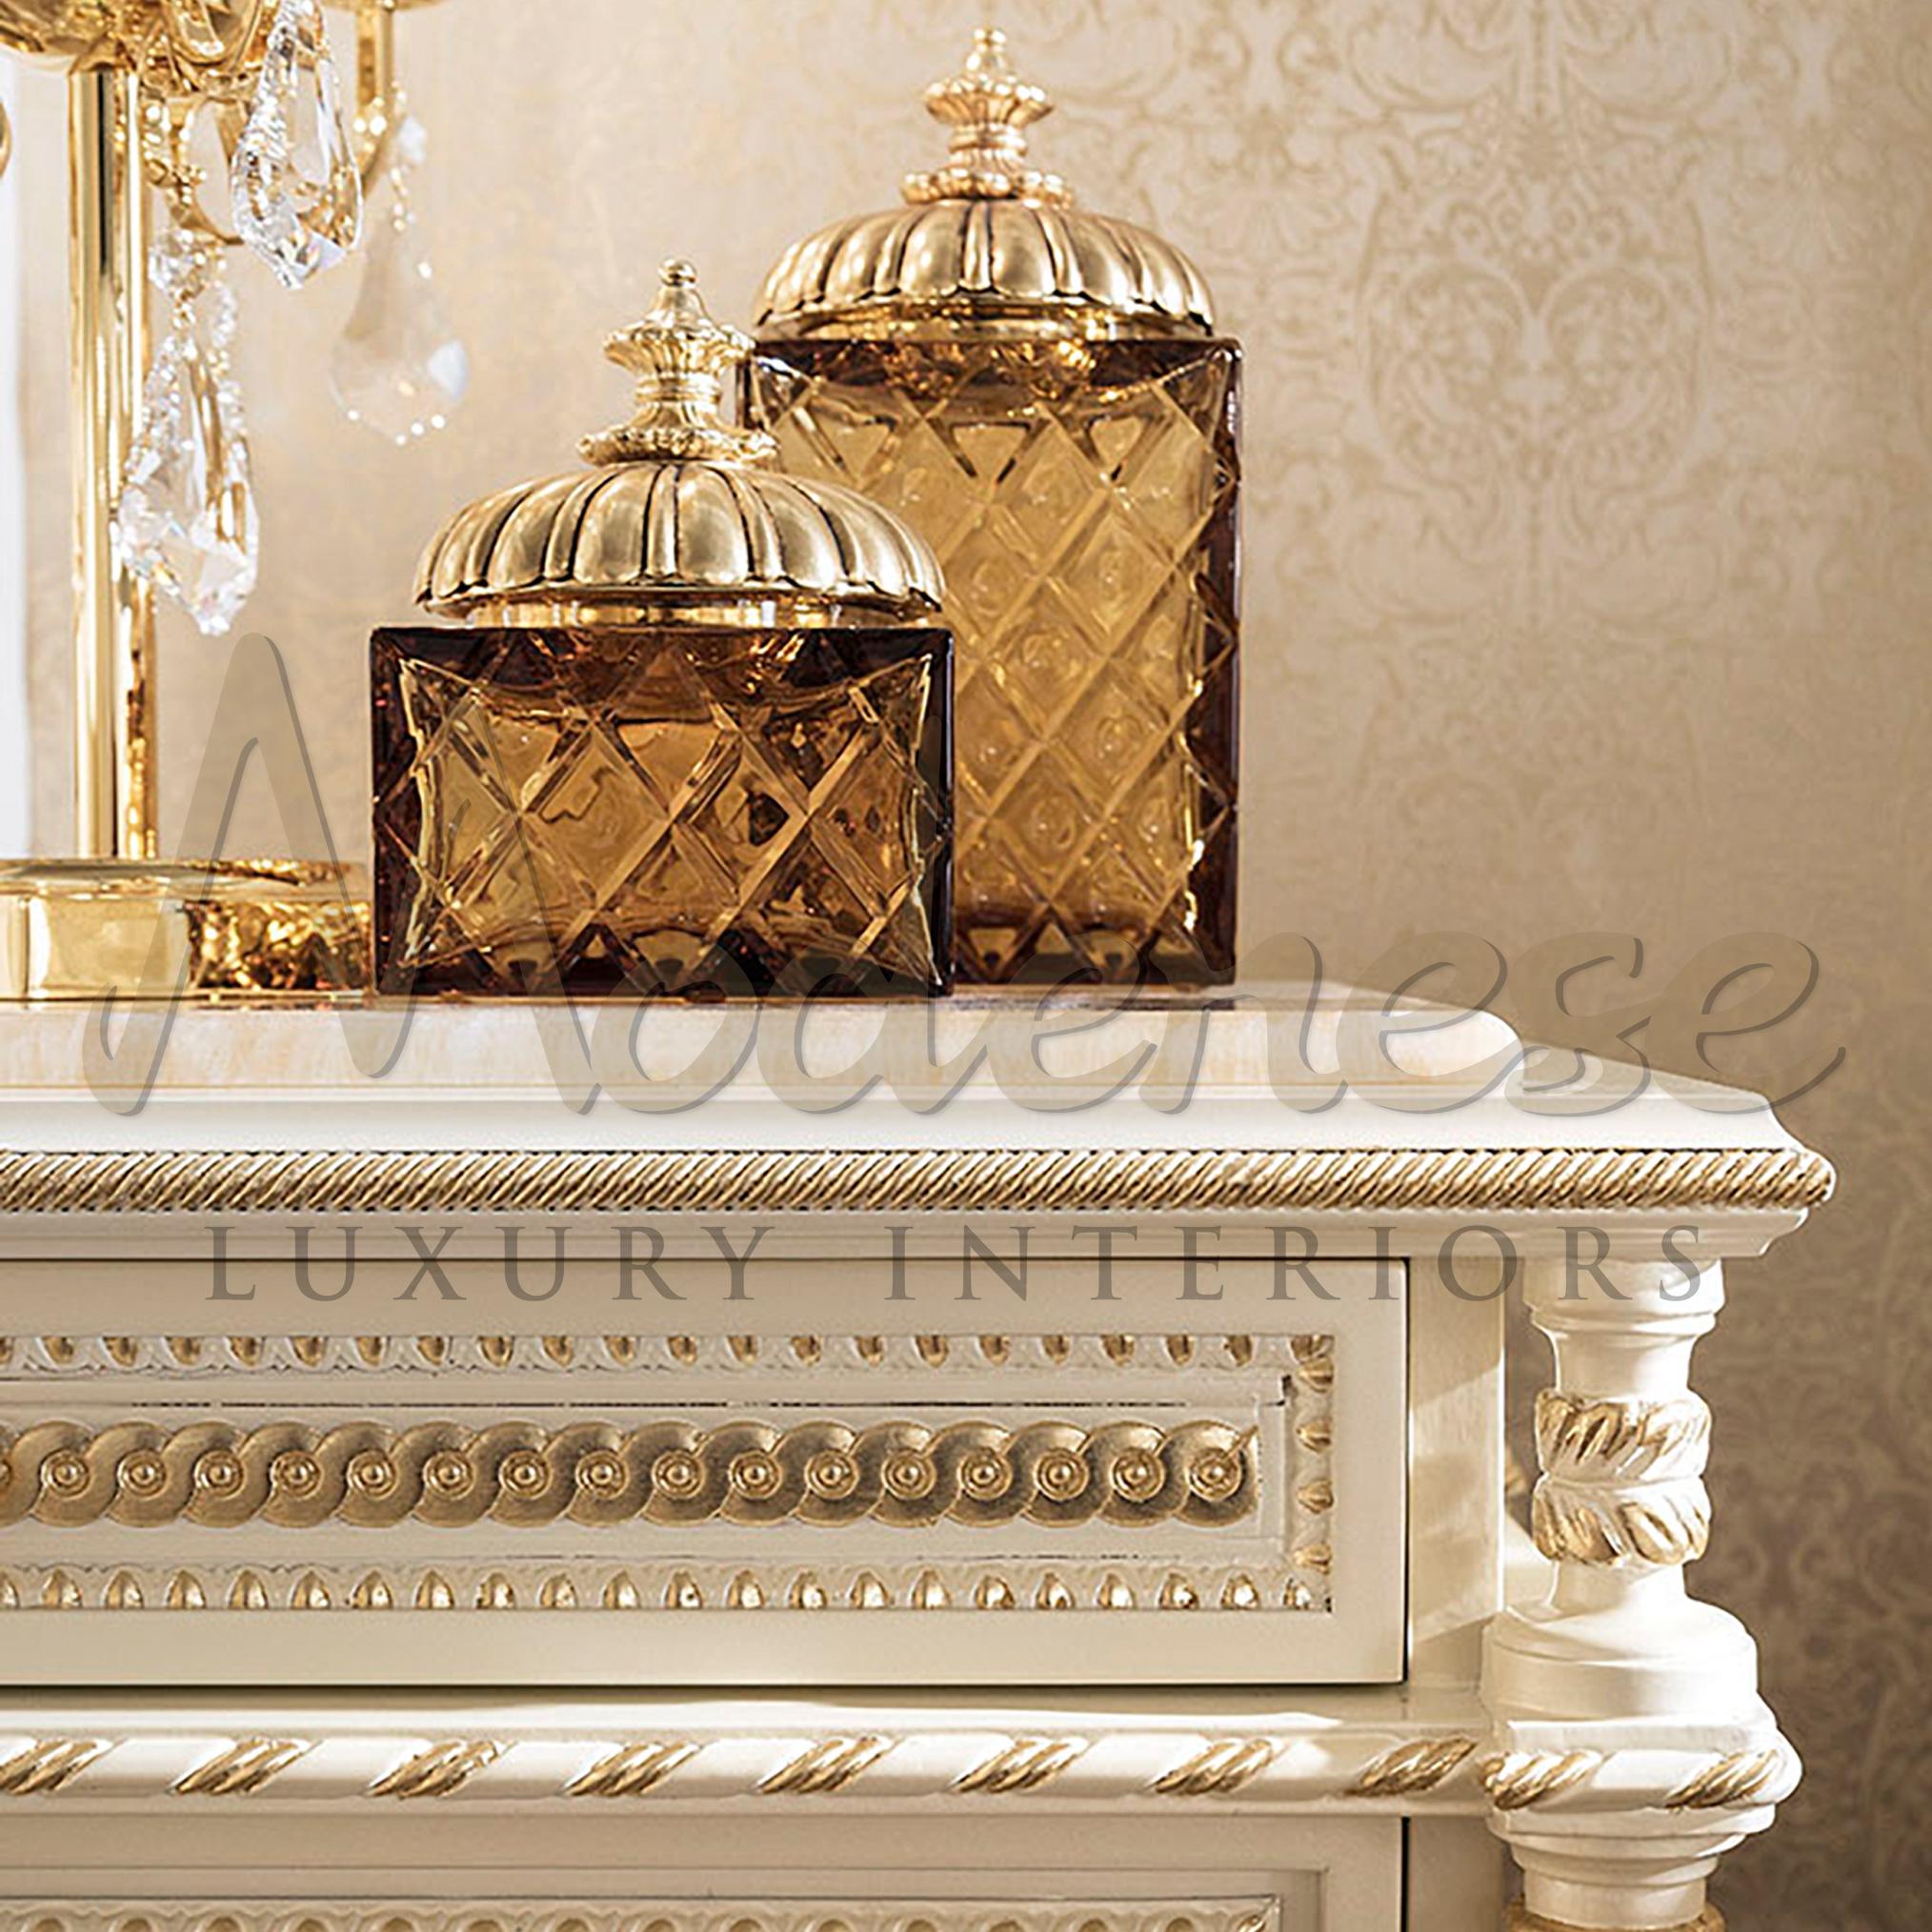 Luxurious empire-style dresser by Modenese Luxury Interiors, Italian furniture producer. Made of solid wood with white laquered finish and Honey Onyx top, plus empire-style wood carved columns, gold leaf details and golden knobs.
The Italian brand